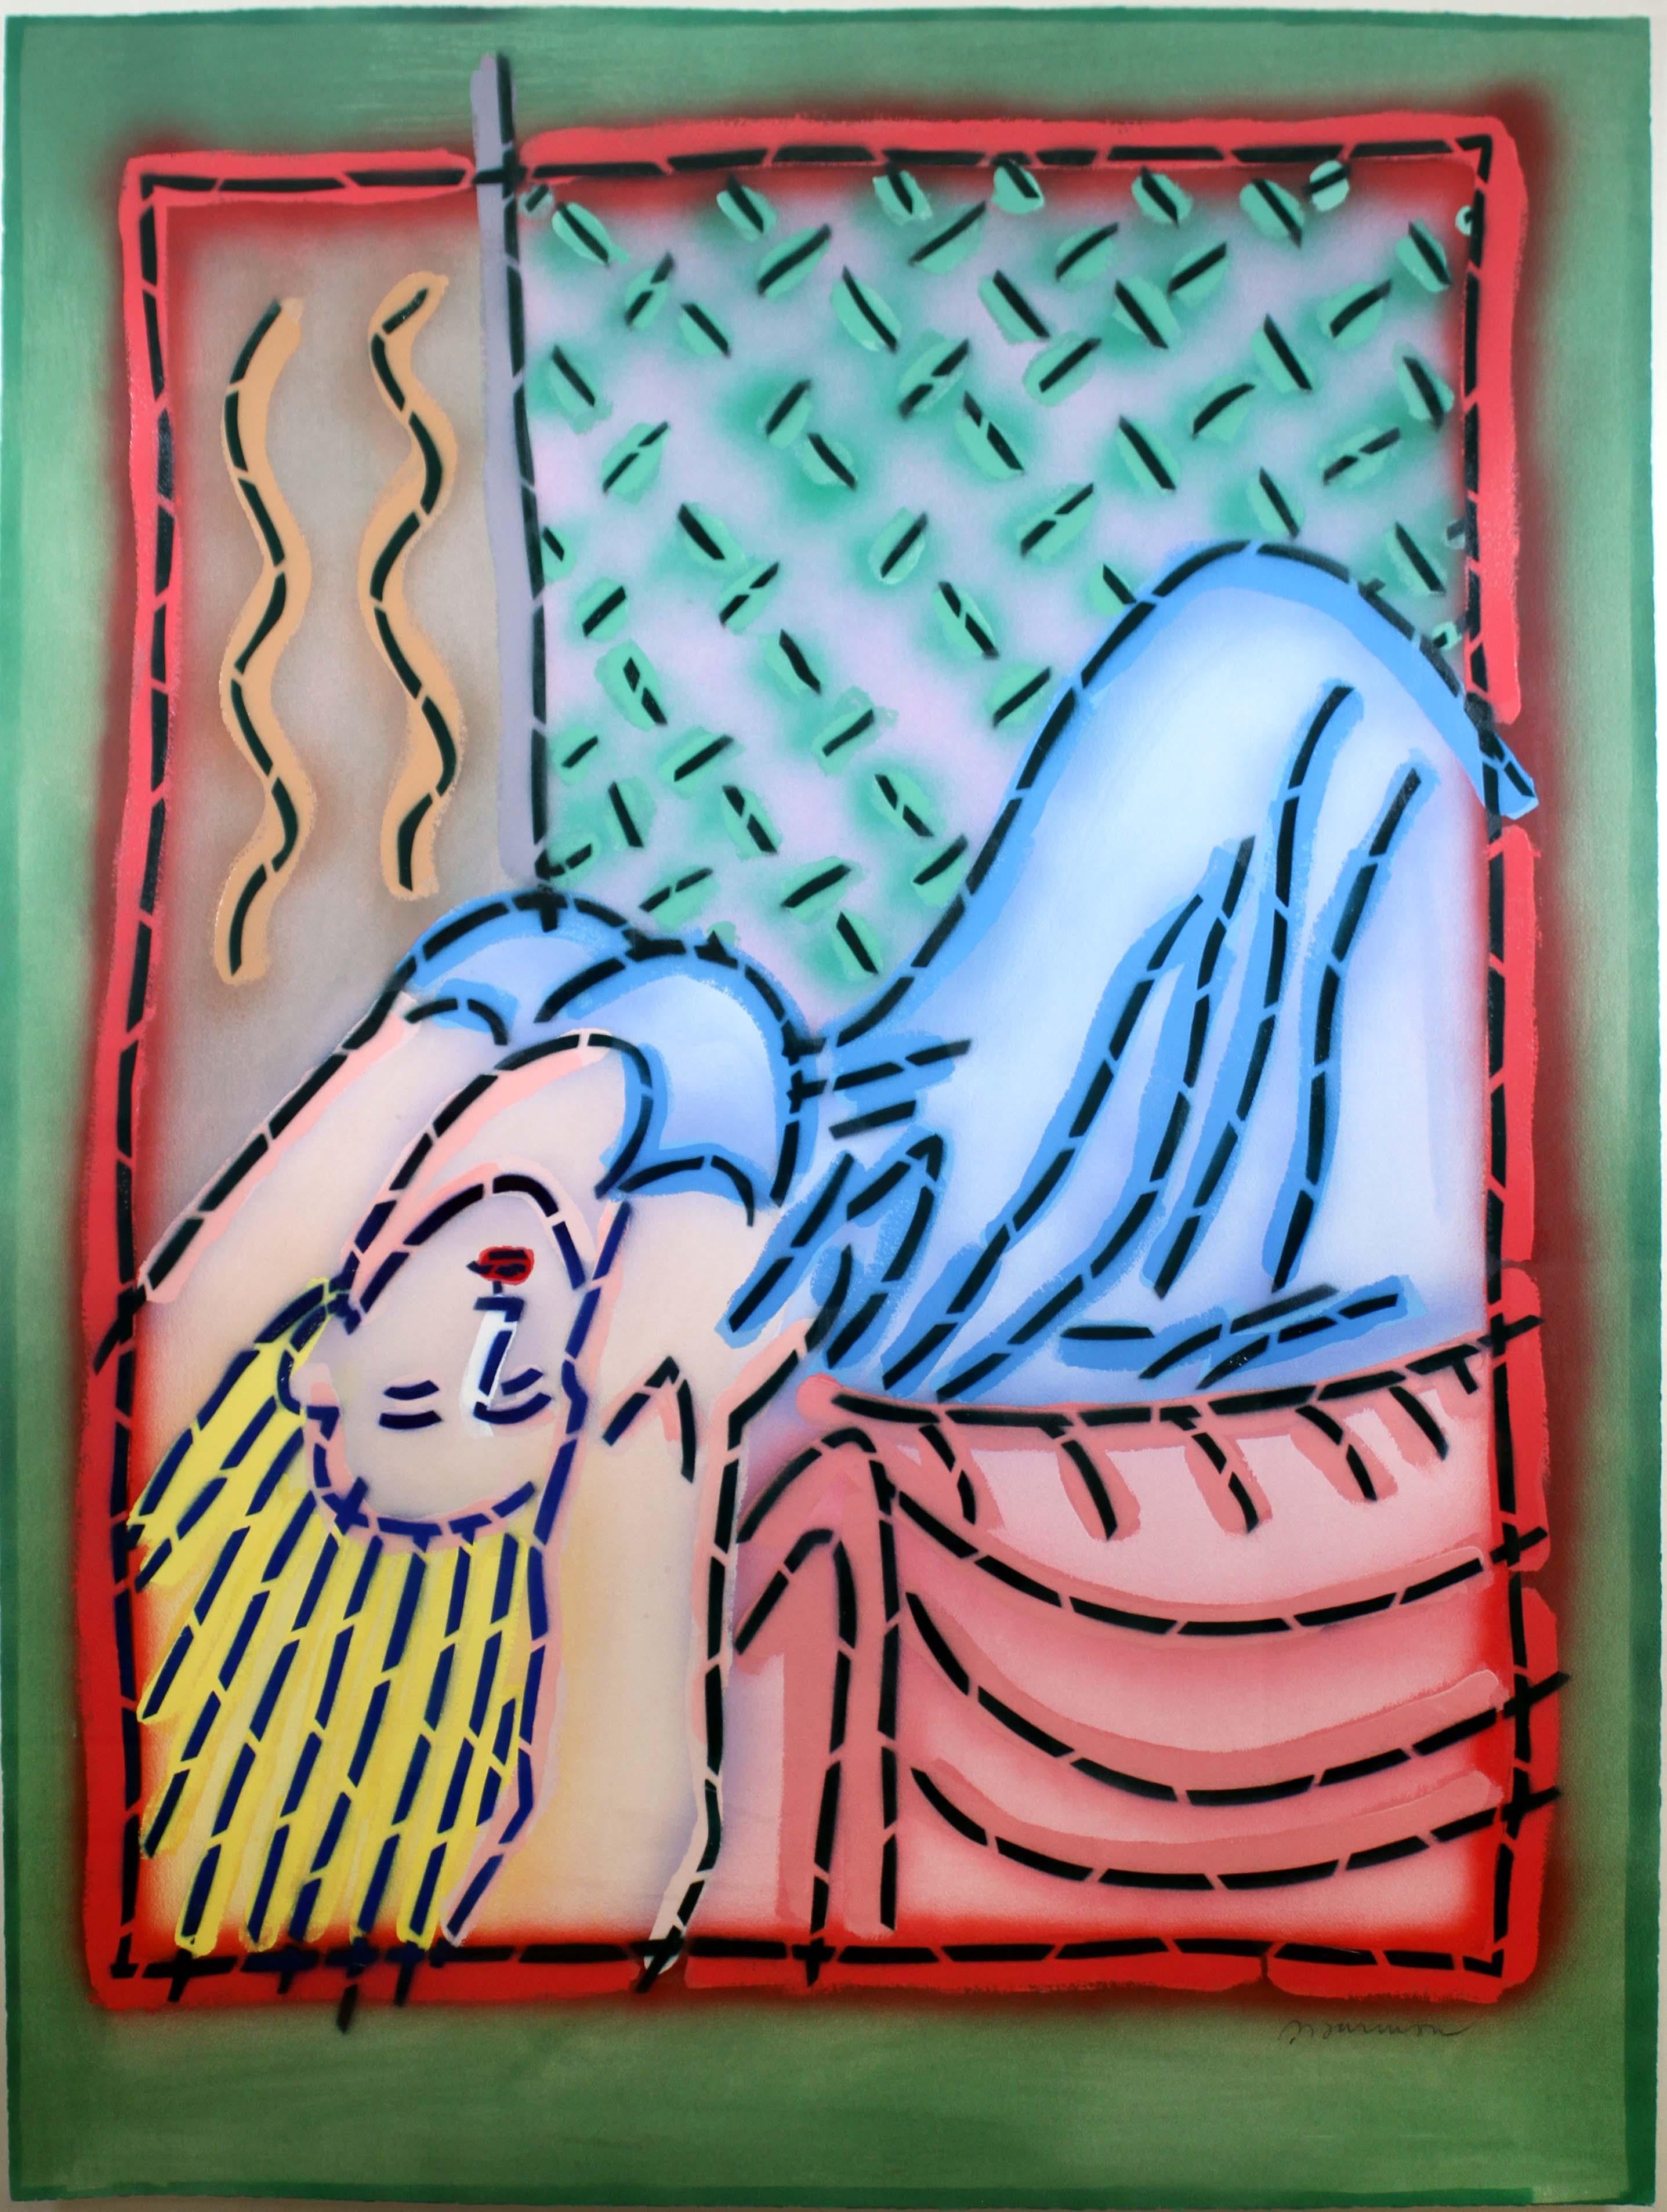 A marvelous monumental mixed-media painting on paper depicting a reclining nude. Signed in pencil on the bottom right, circa 1990s. A fantastic re-interpretation of pop art that adds an element of pizzazz and glamour to a contemporary space. The